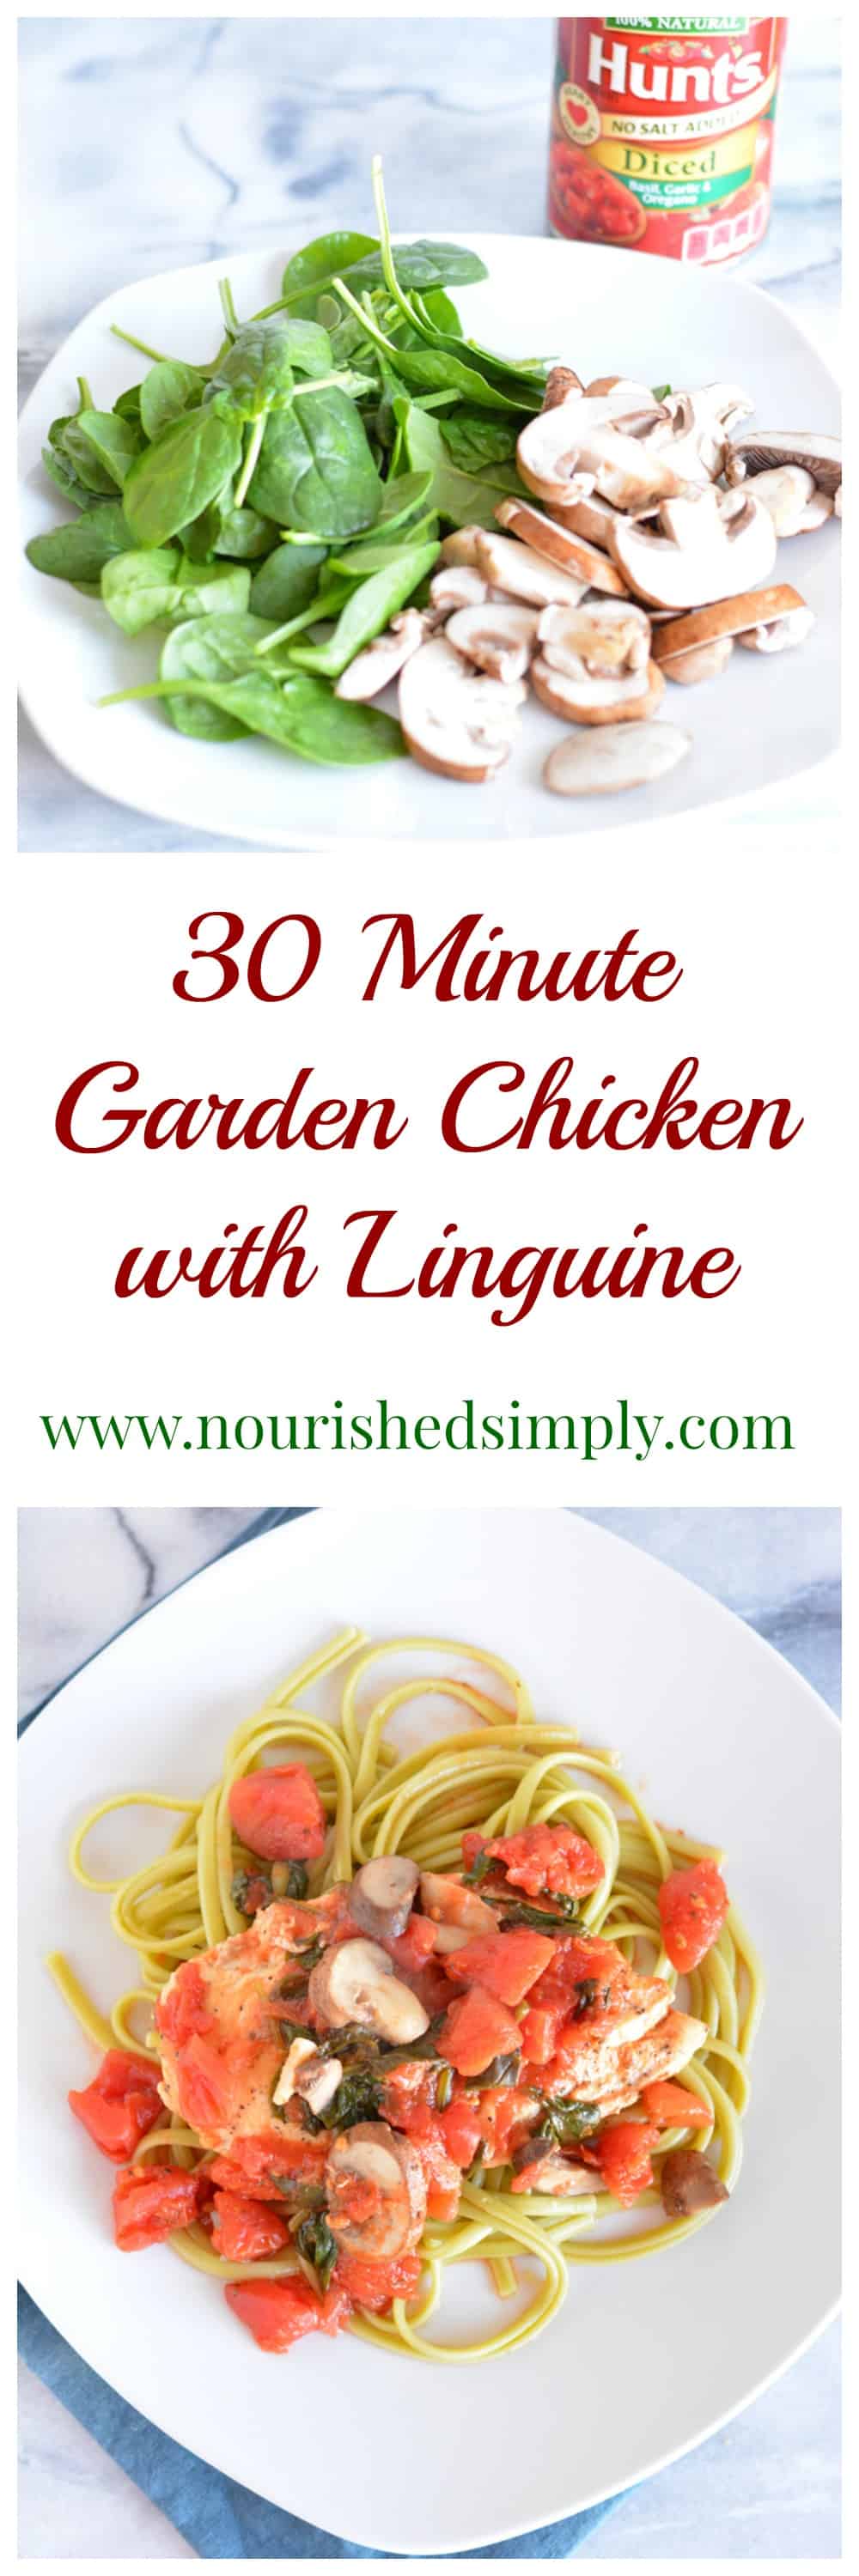 30 Minute Garden Chicken with Linguine made with only 7 ingredients